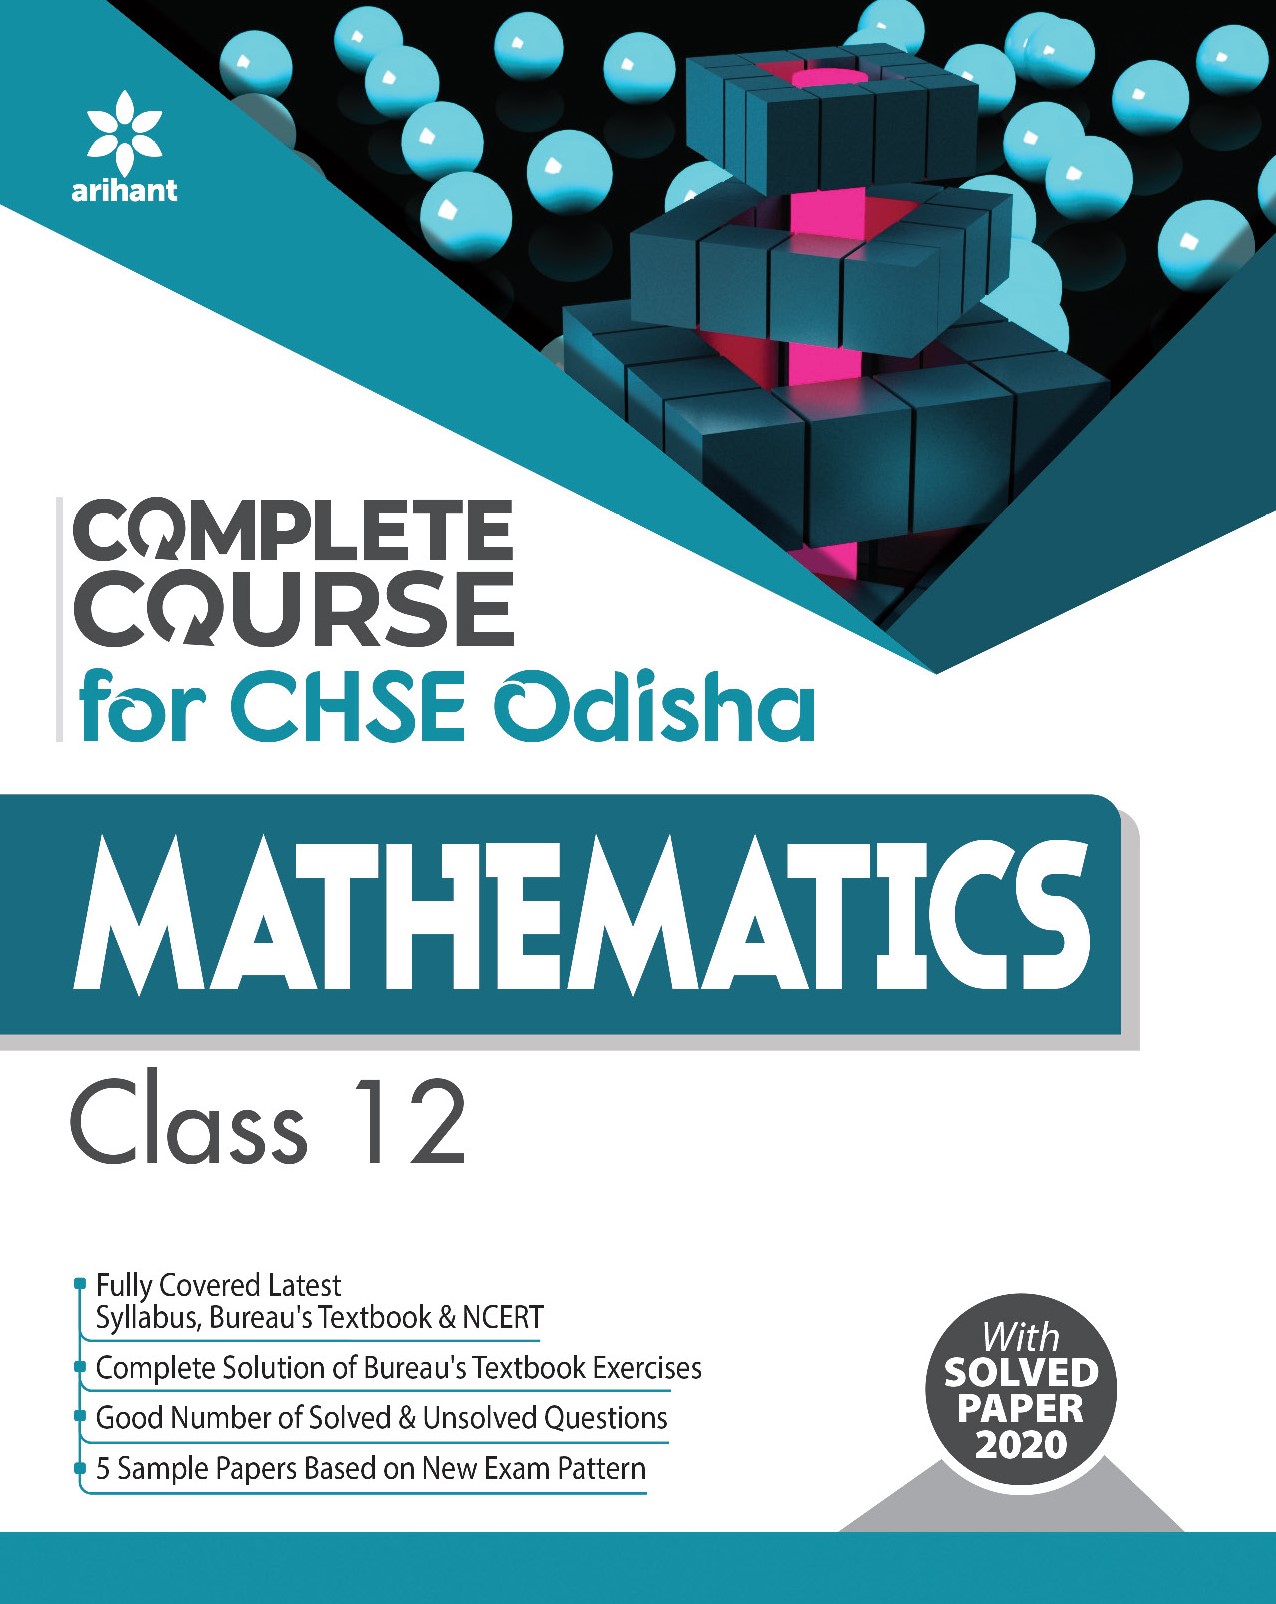 Complete Course For CHSE Odisha Mathematics Class 12 for 2021 Exam